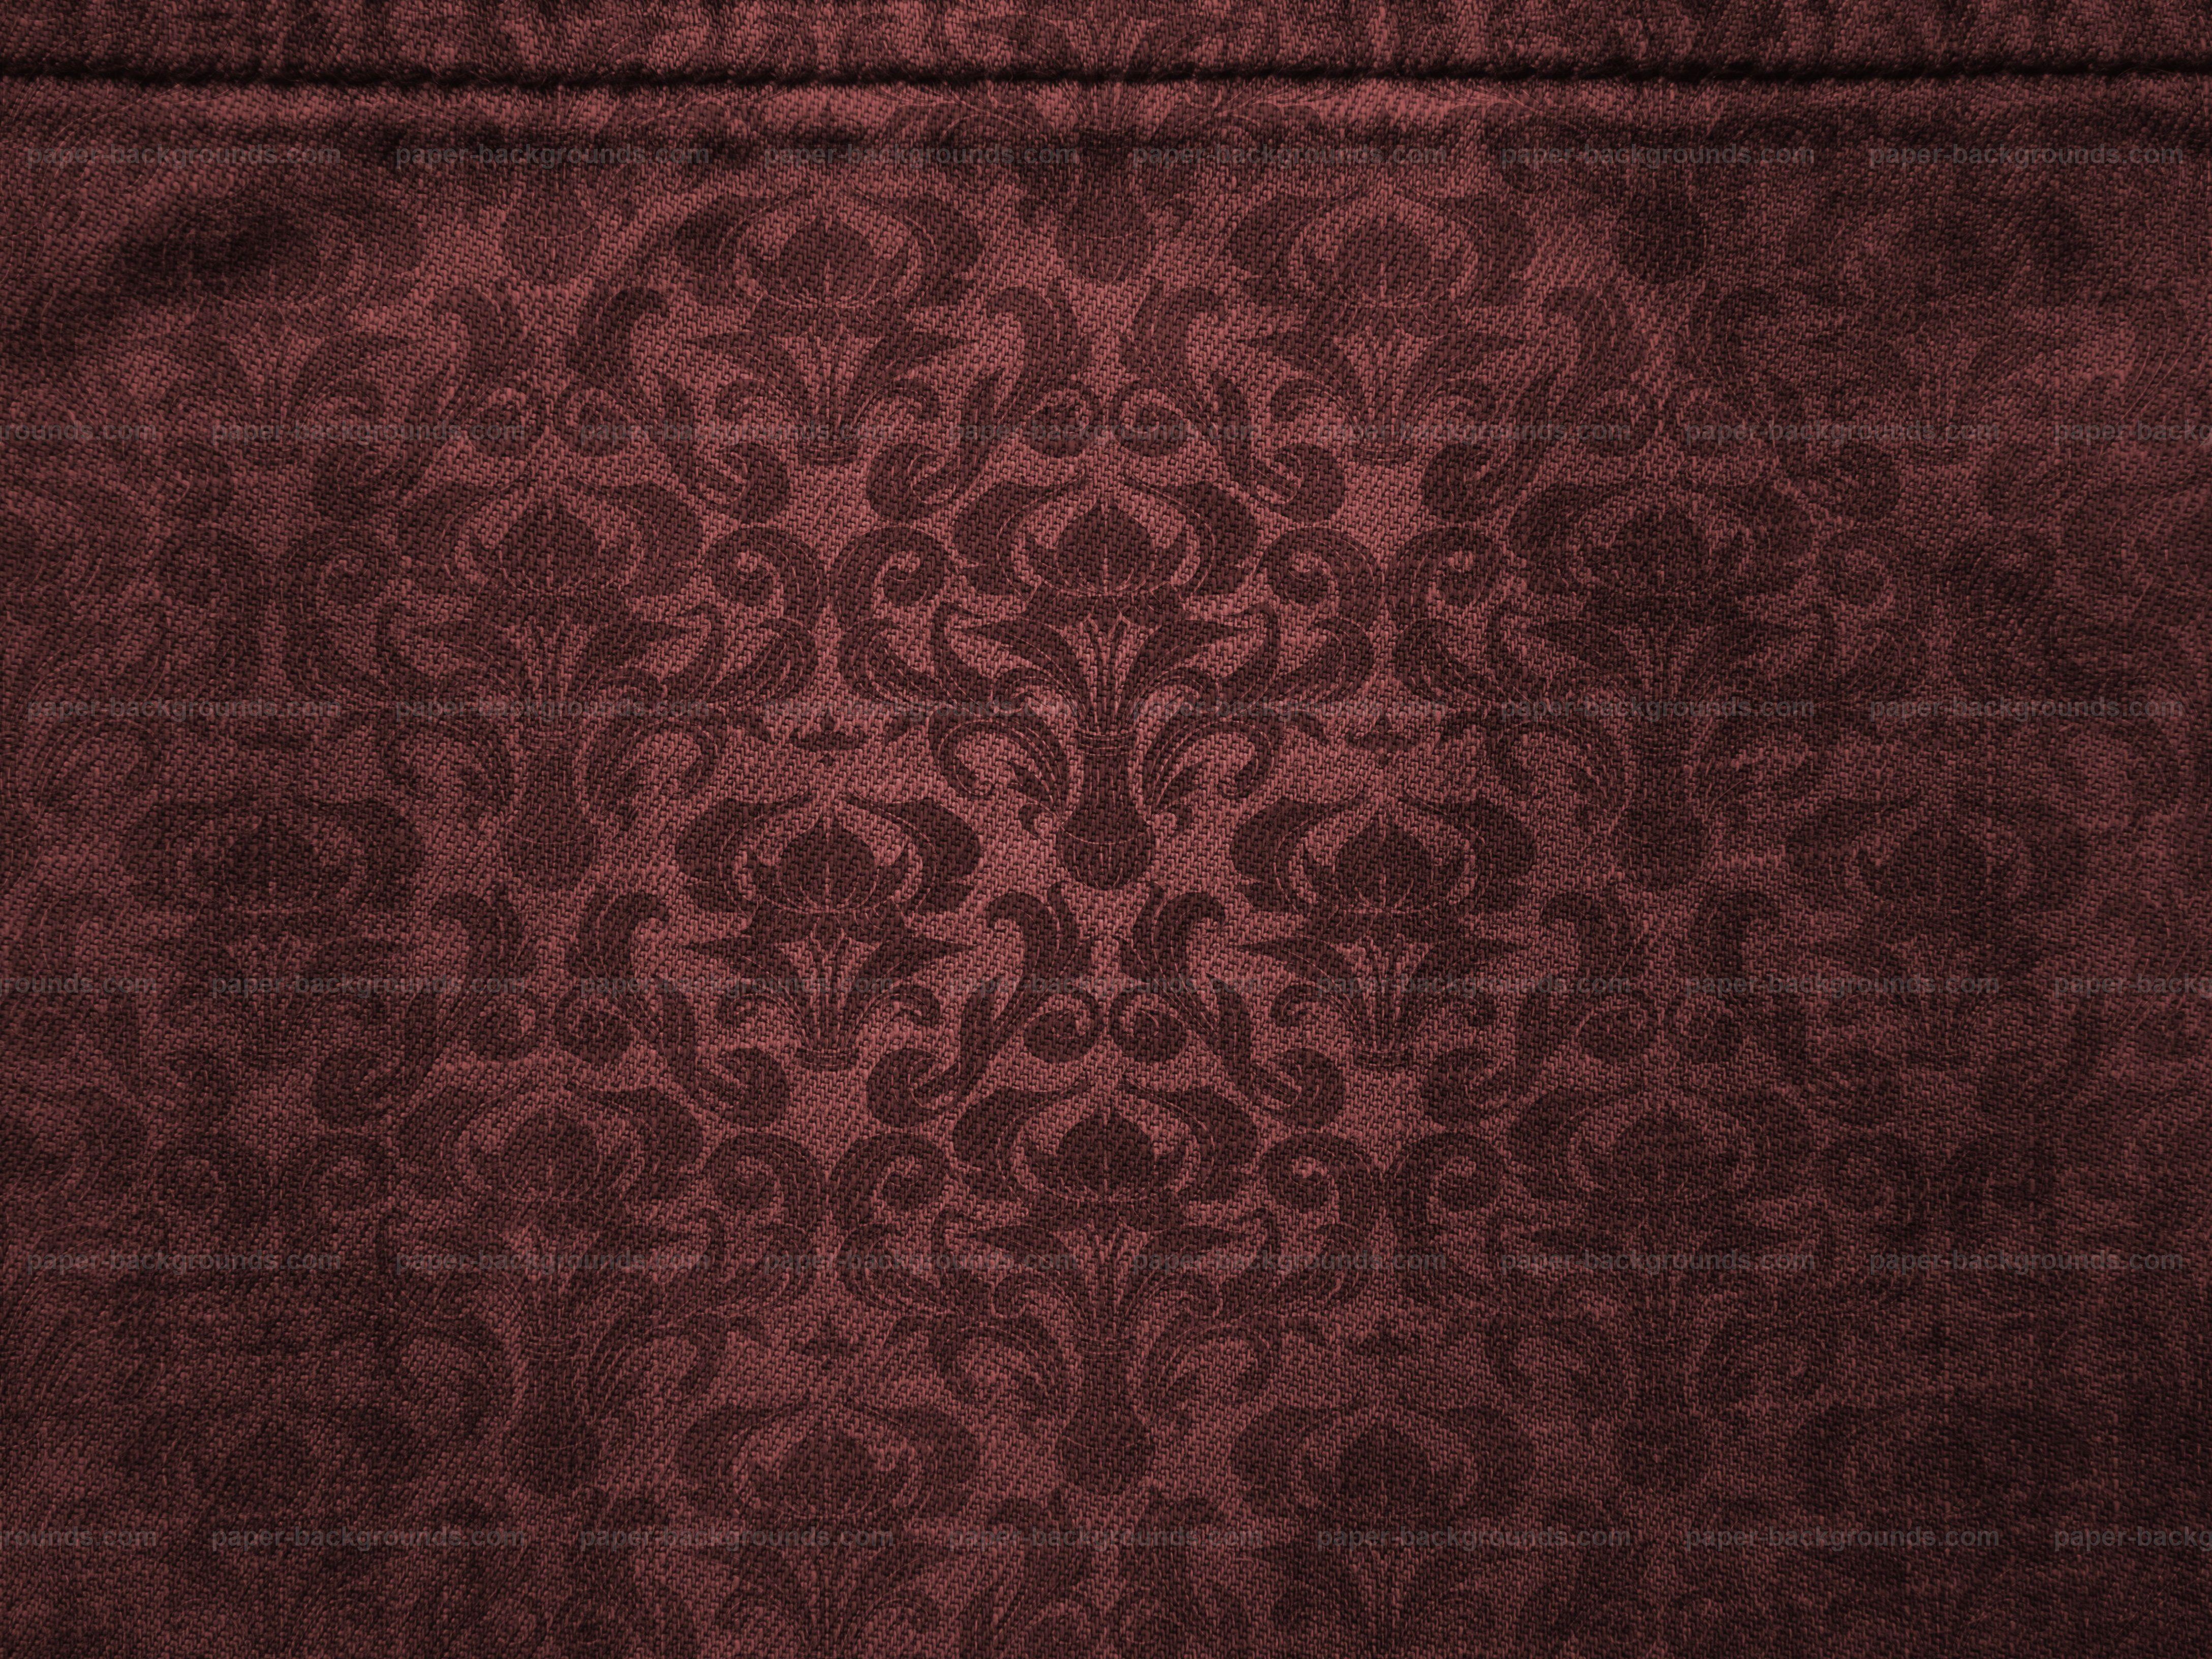 Paper Background. Brown Canvas with Damask Pattern Background